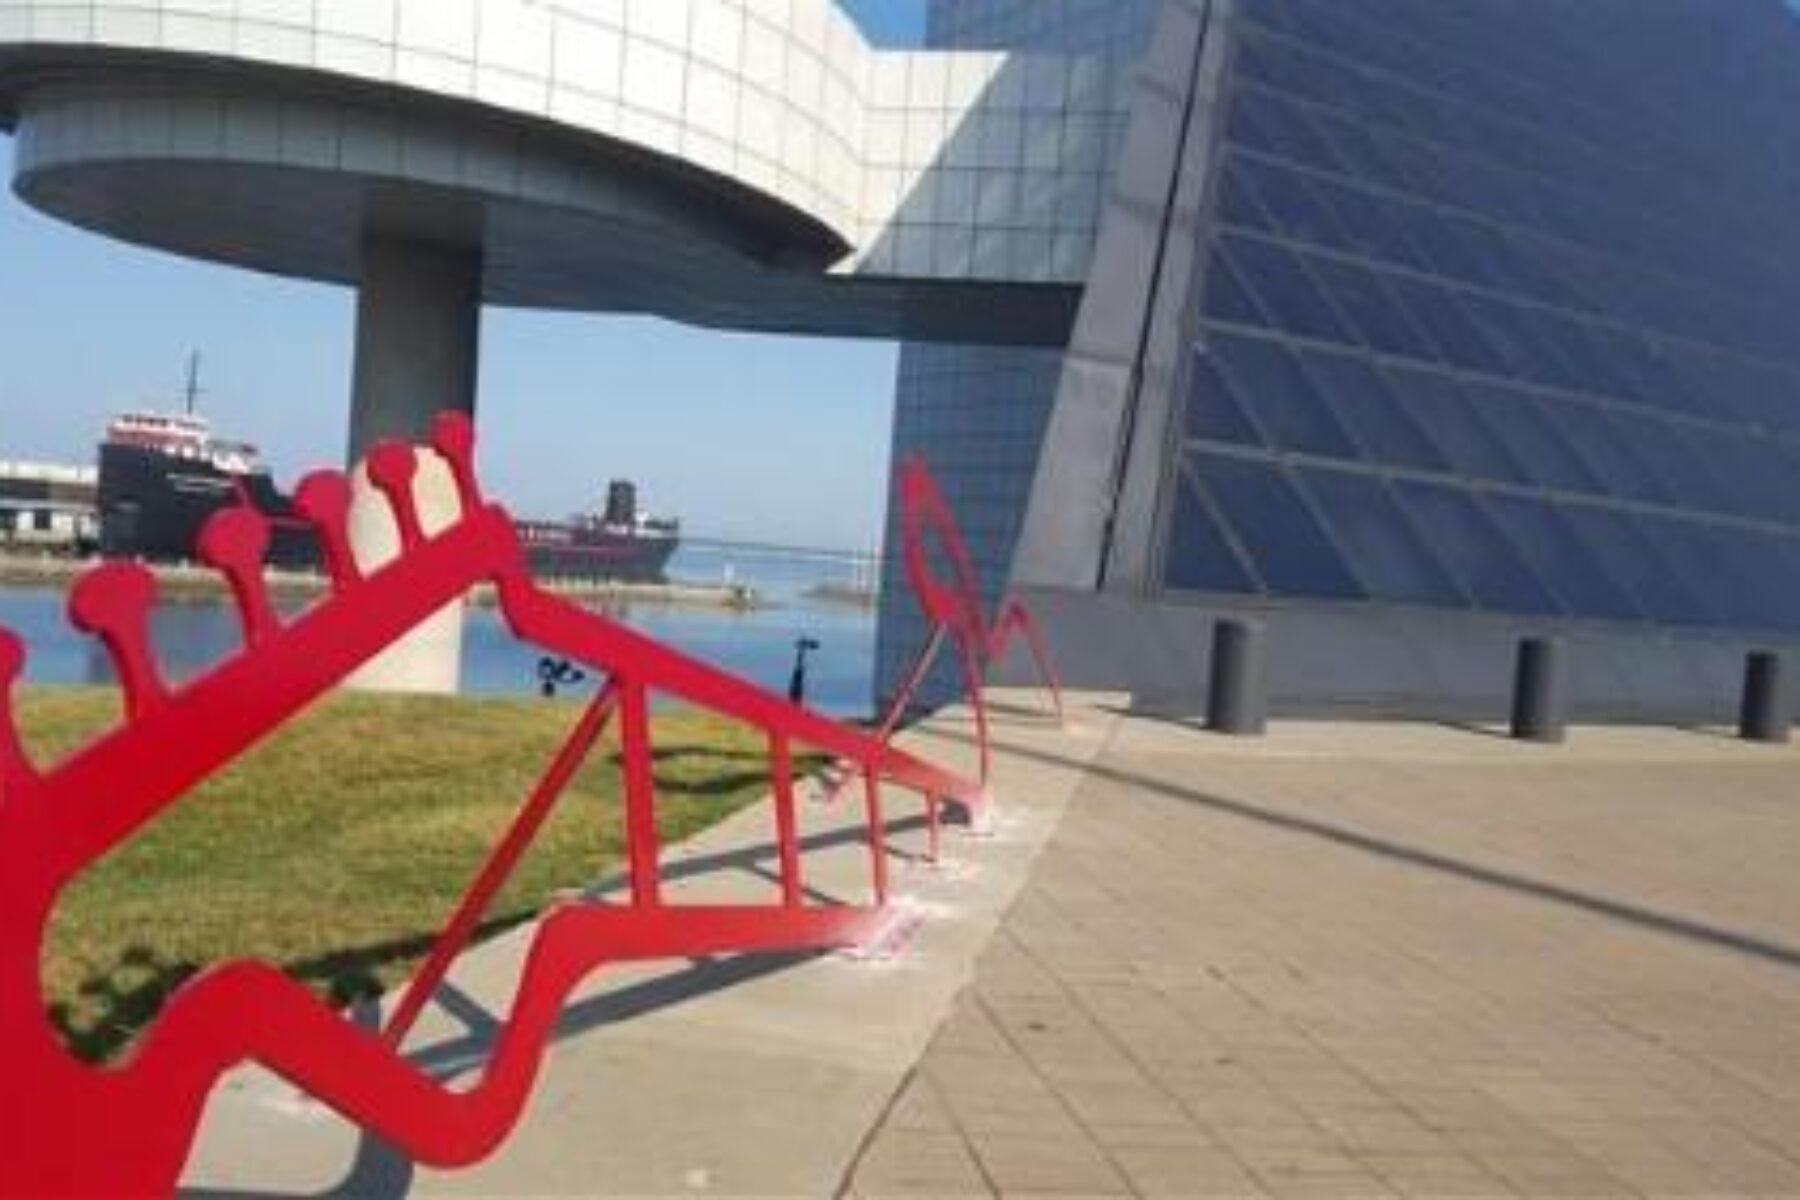 The Cleveland Lakefront Bikeway passes major attractions like the Rock & Roll Hall of Fame | Photo courtesy Traillink user roddo